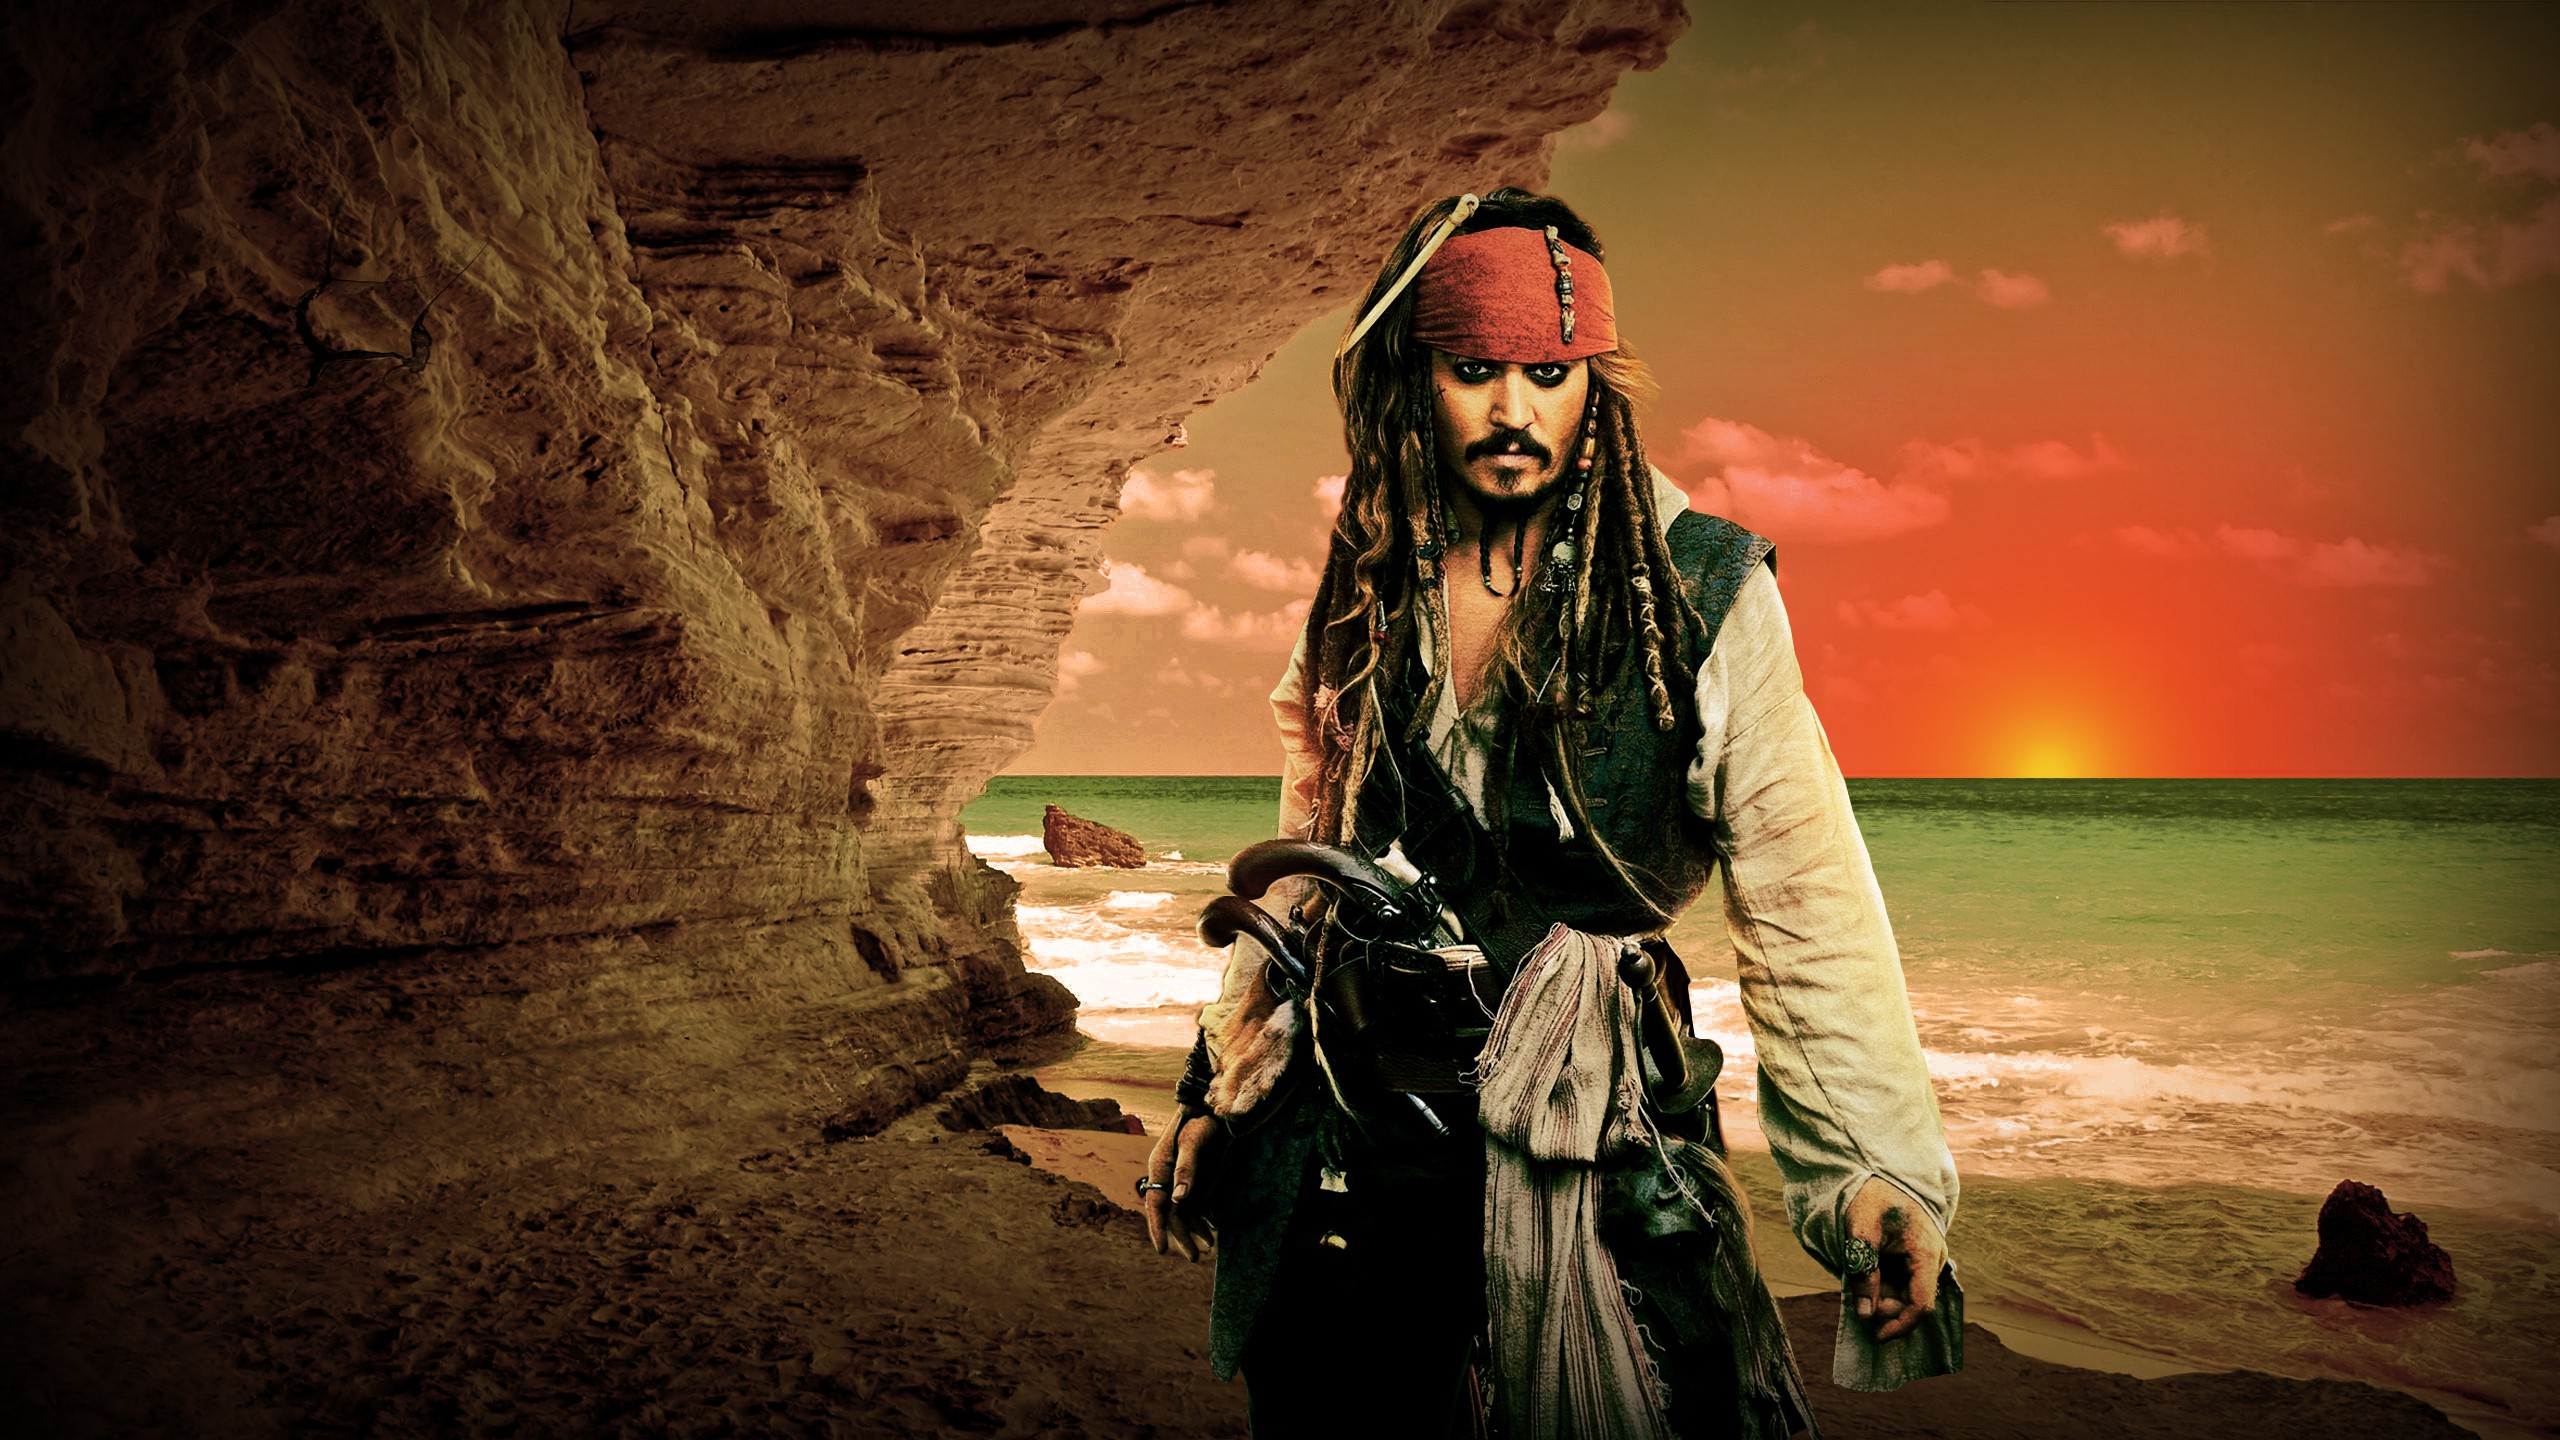 Pirates Of The Caribbean Full HD Wallpaper And Background